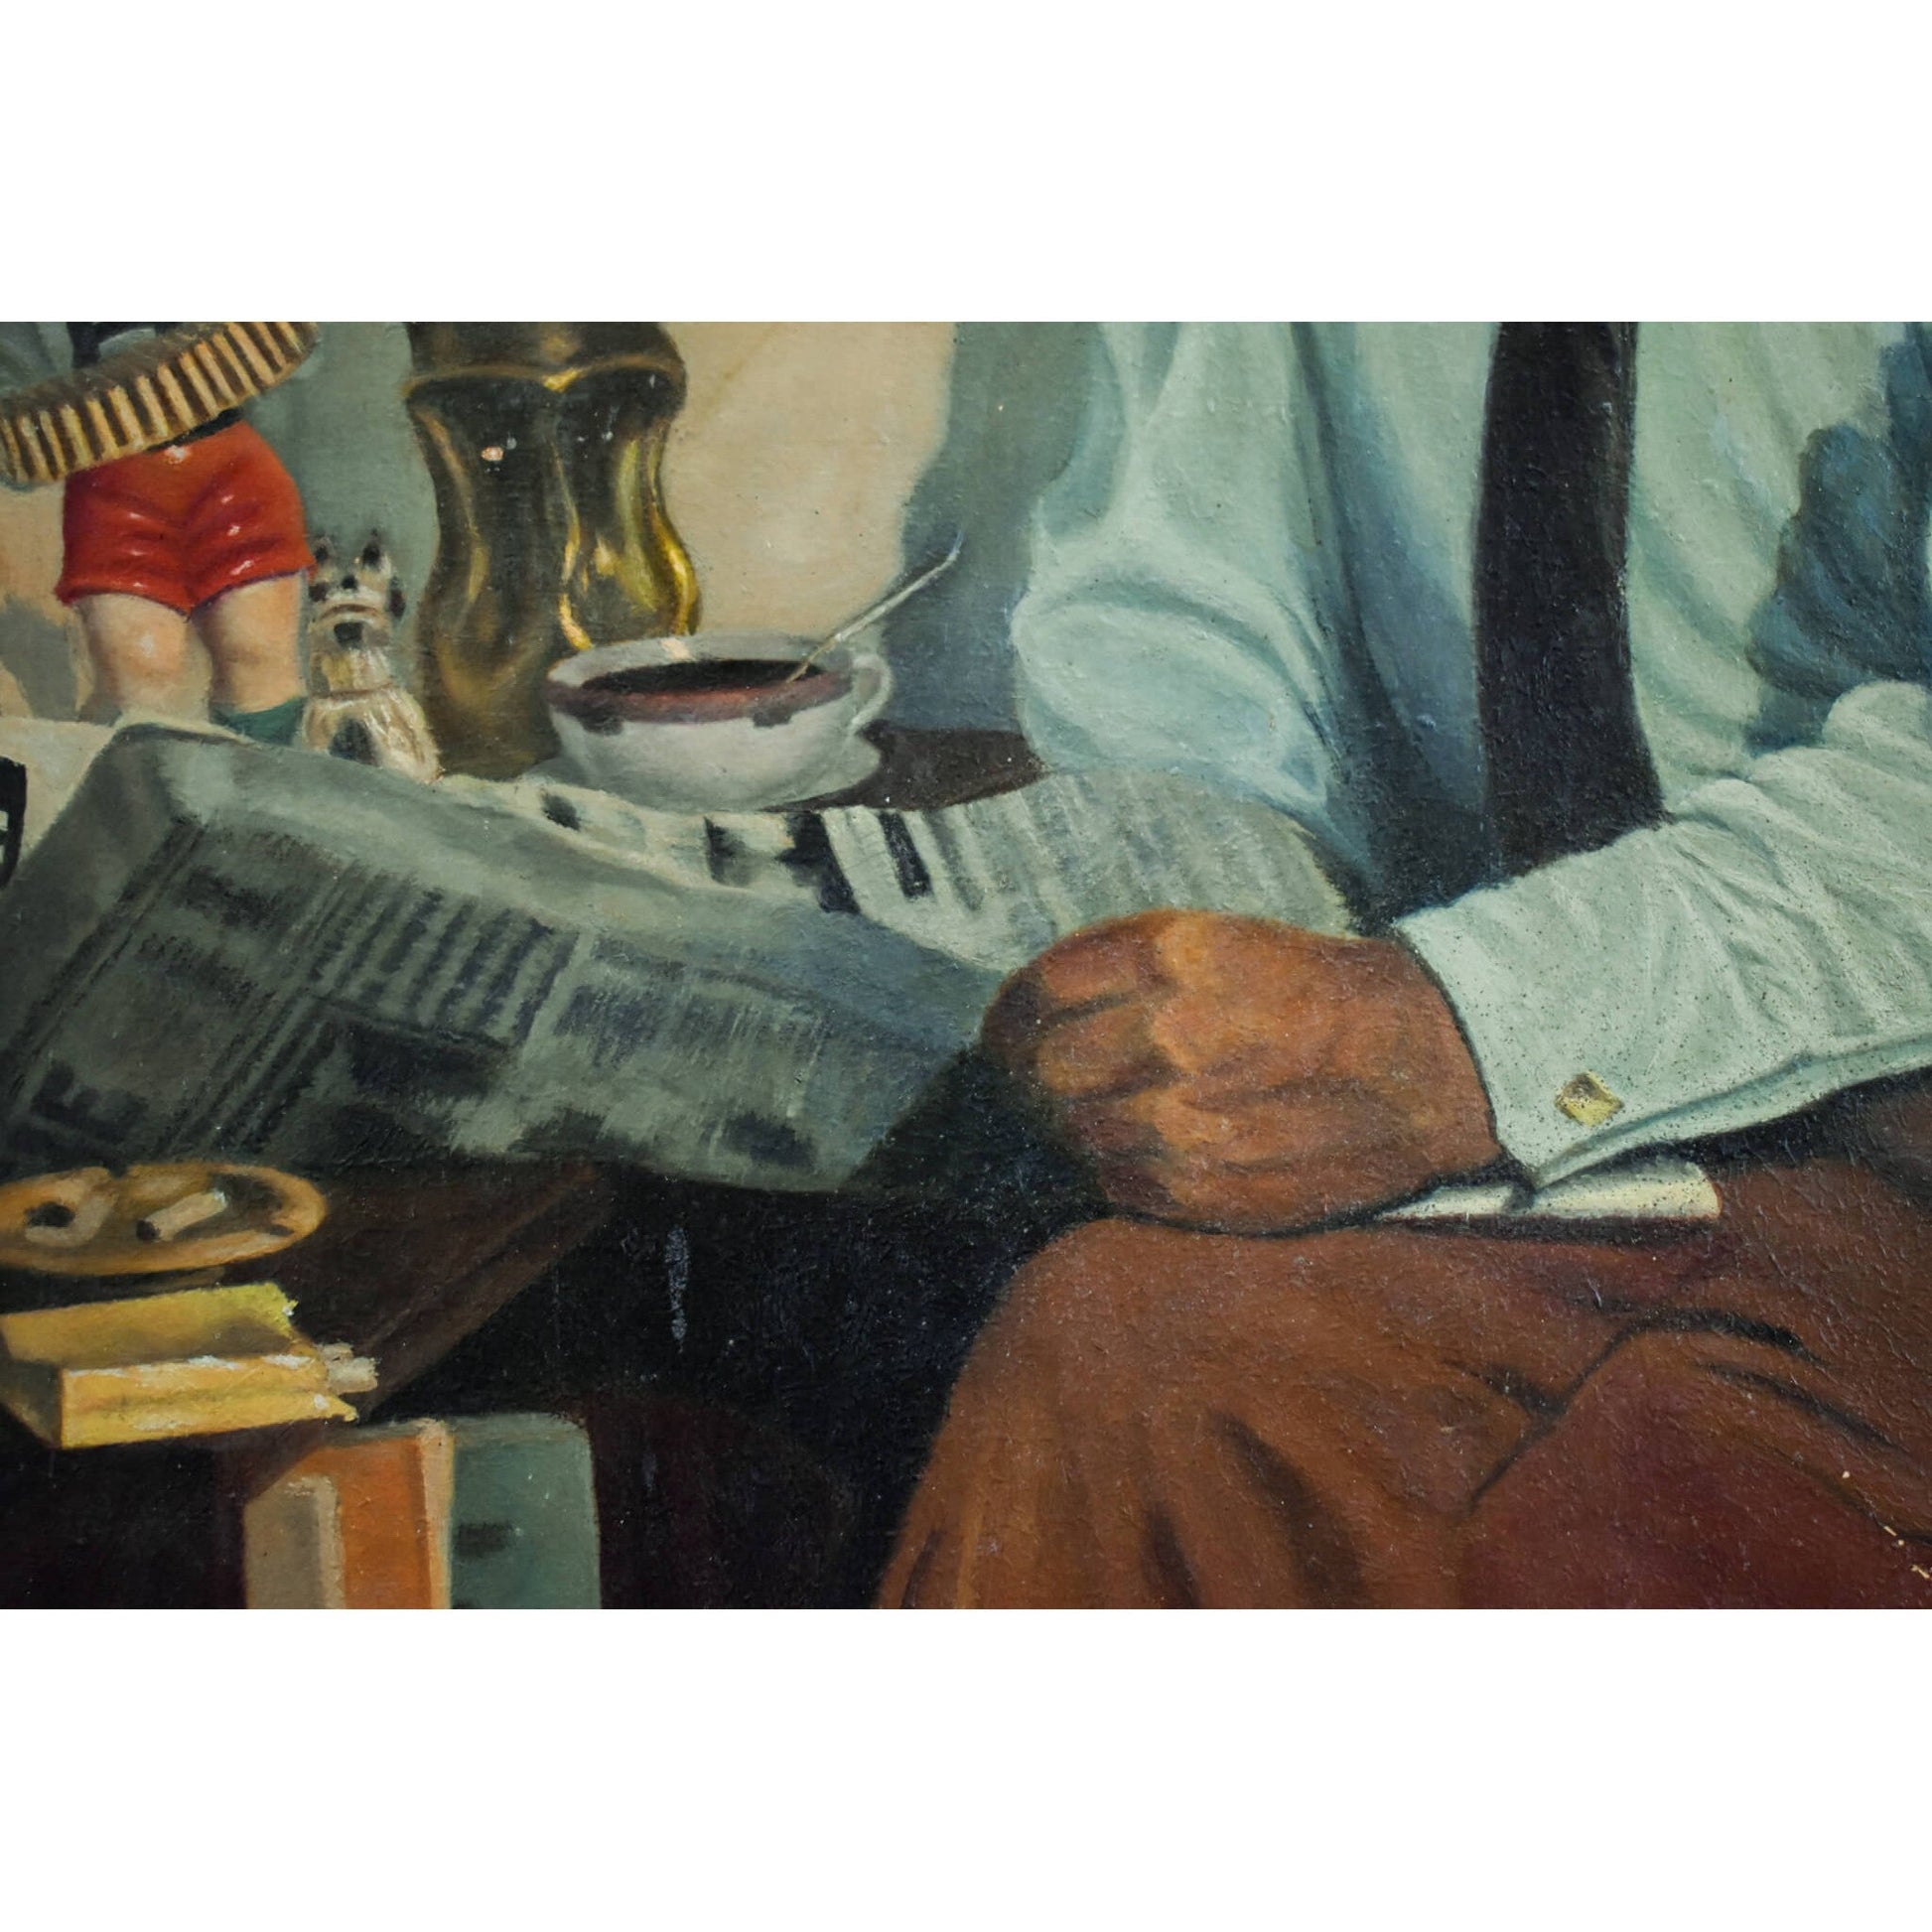 Vintage genre oil painting, interior scene with a man reading a newspaper, to be restored, for sale at Winckelmann Gallery.